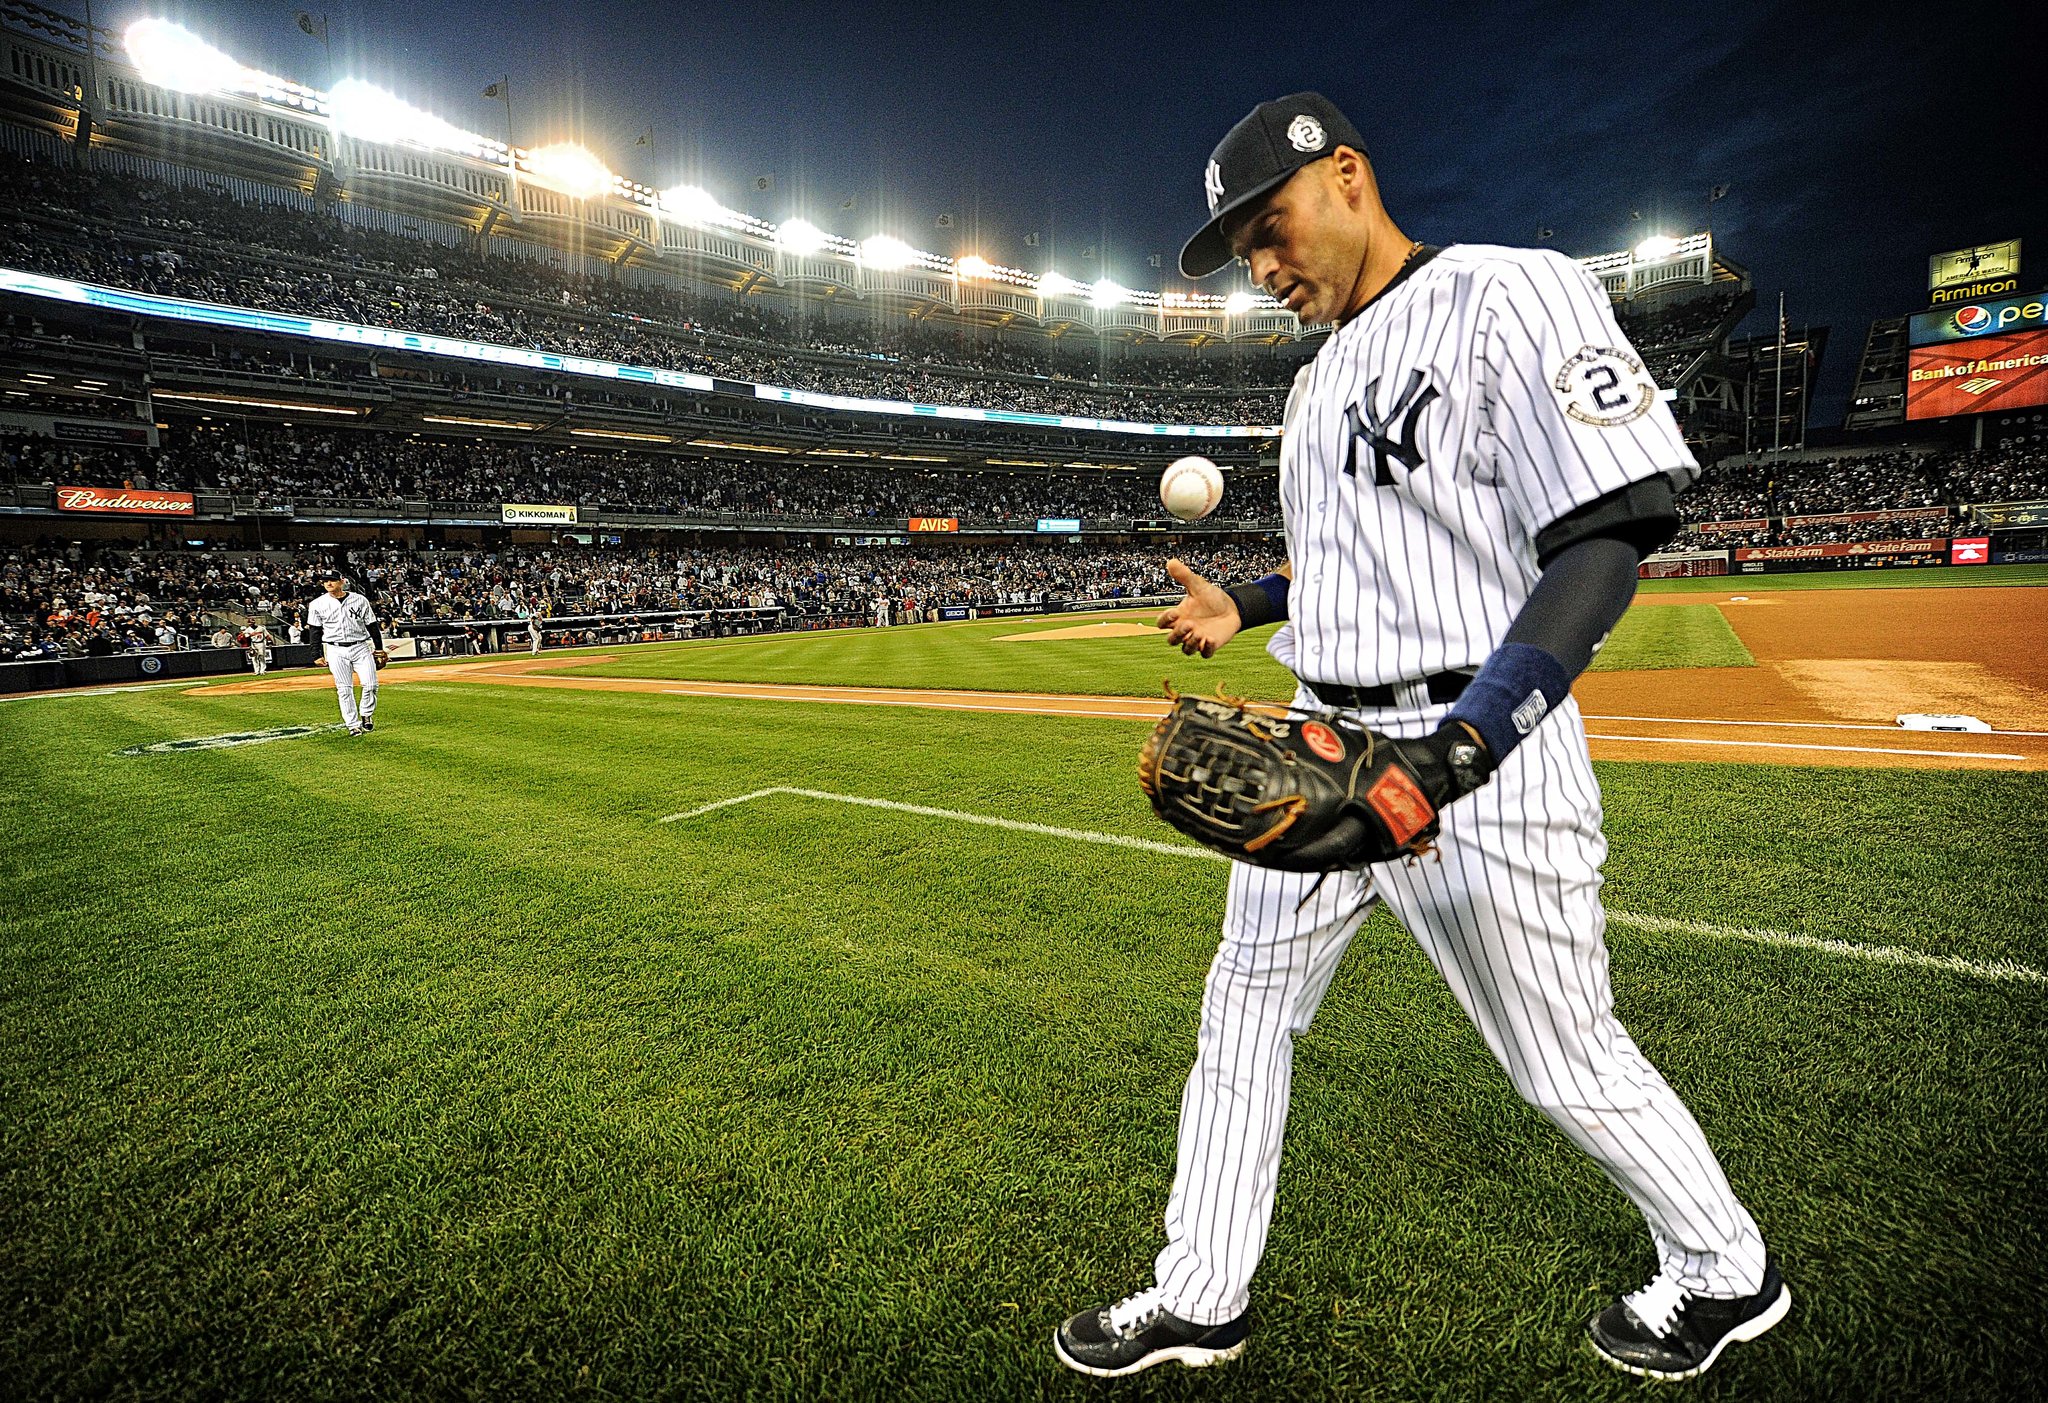 How Many World Series Rings Does Derek Jeter Have?